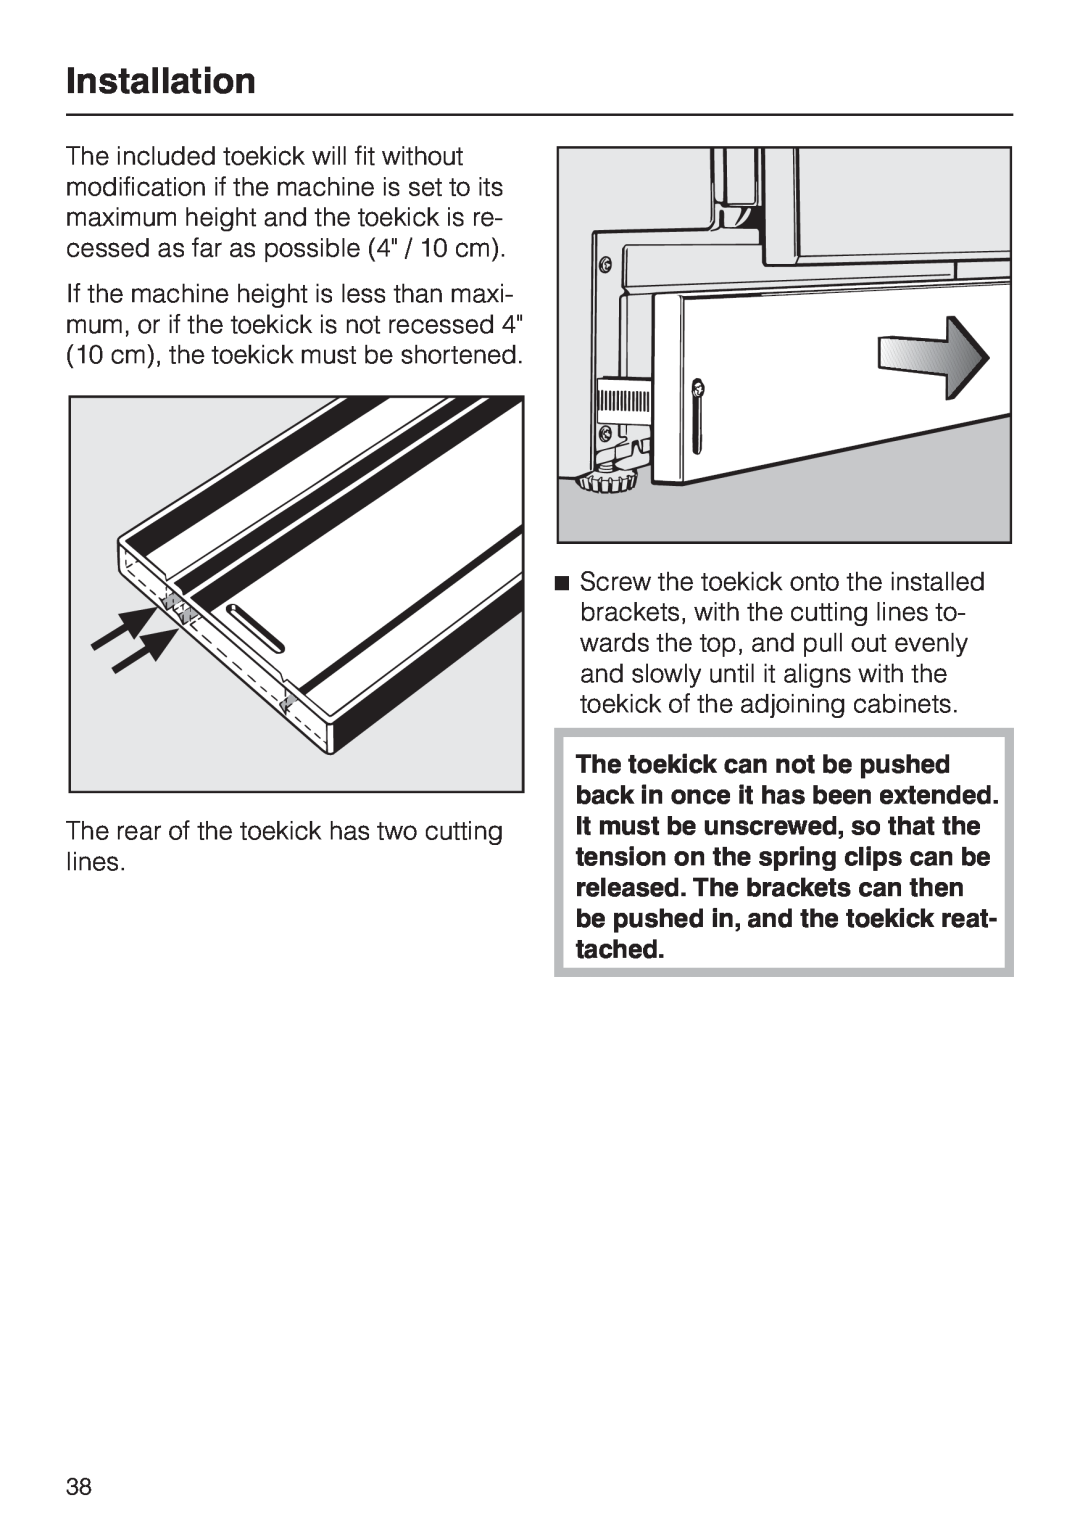 Miele HG02 installation instructions Installation, The rear of the toekick has two cutting lines 